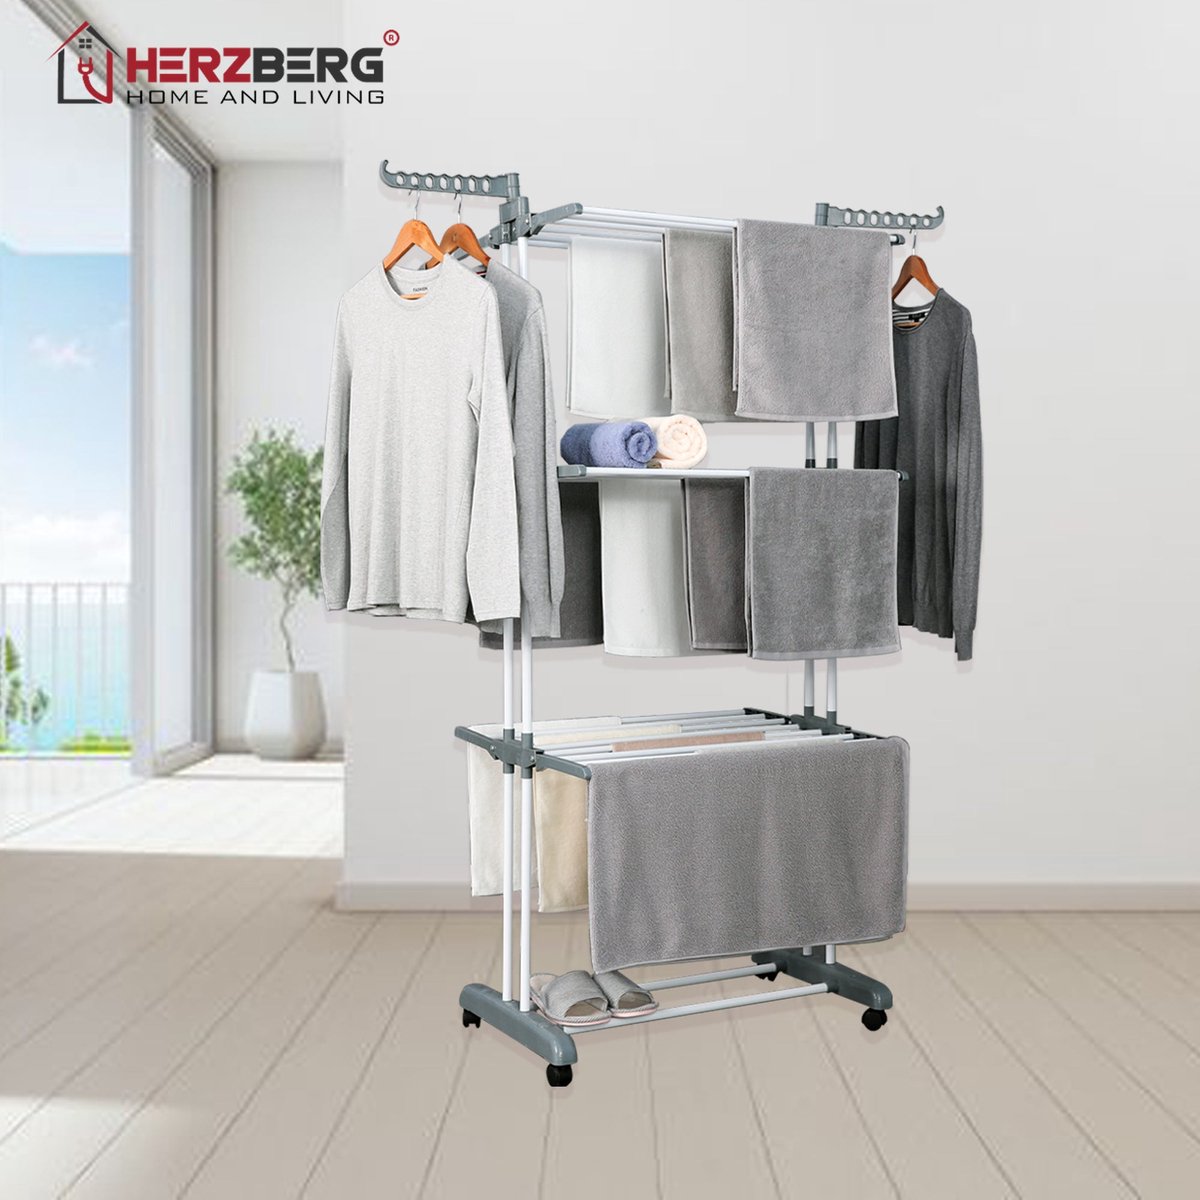 Herzberg HG-8034GRY: Moving Clothes Rack - Grijs